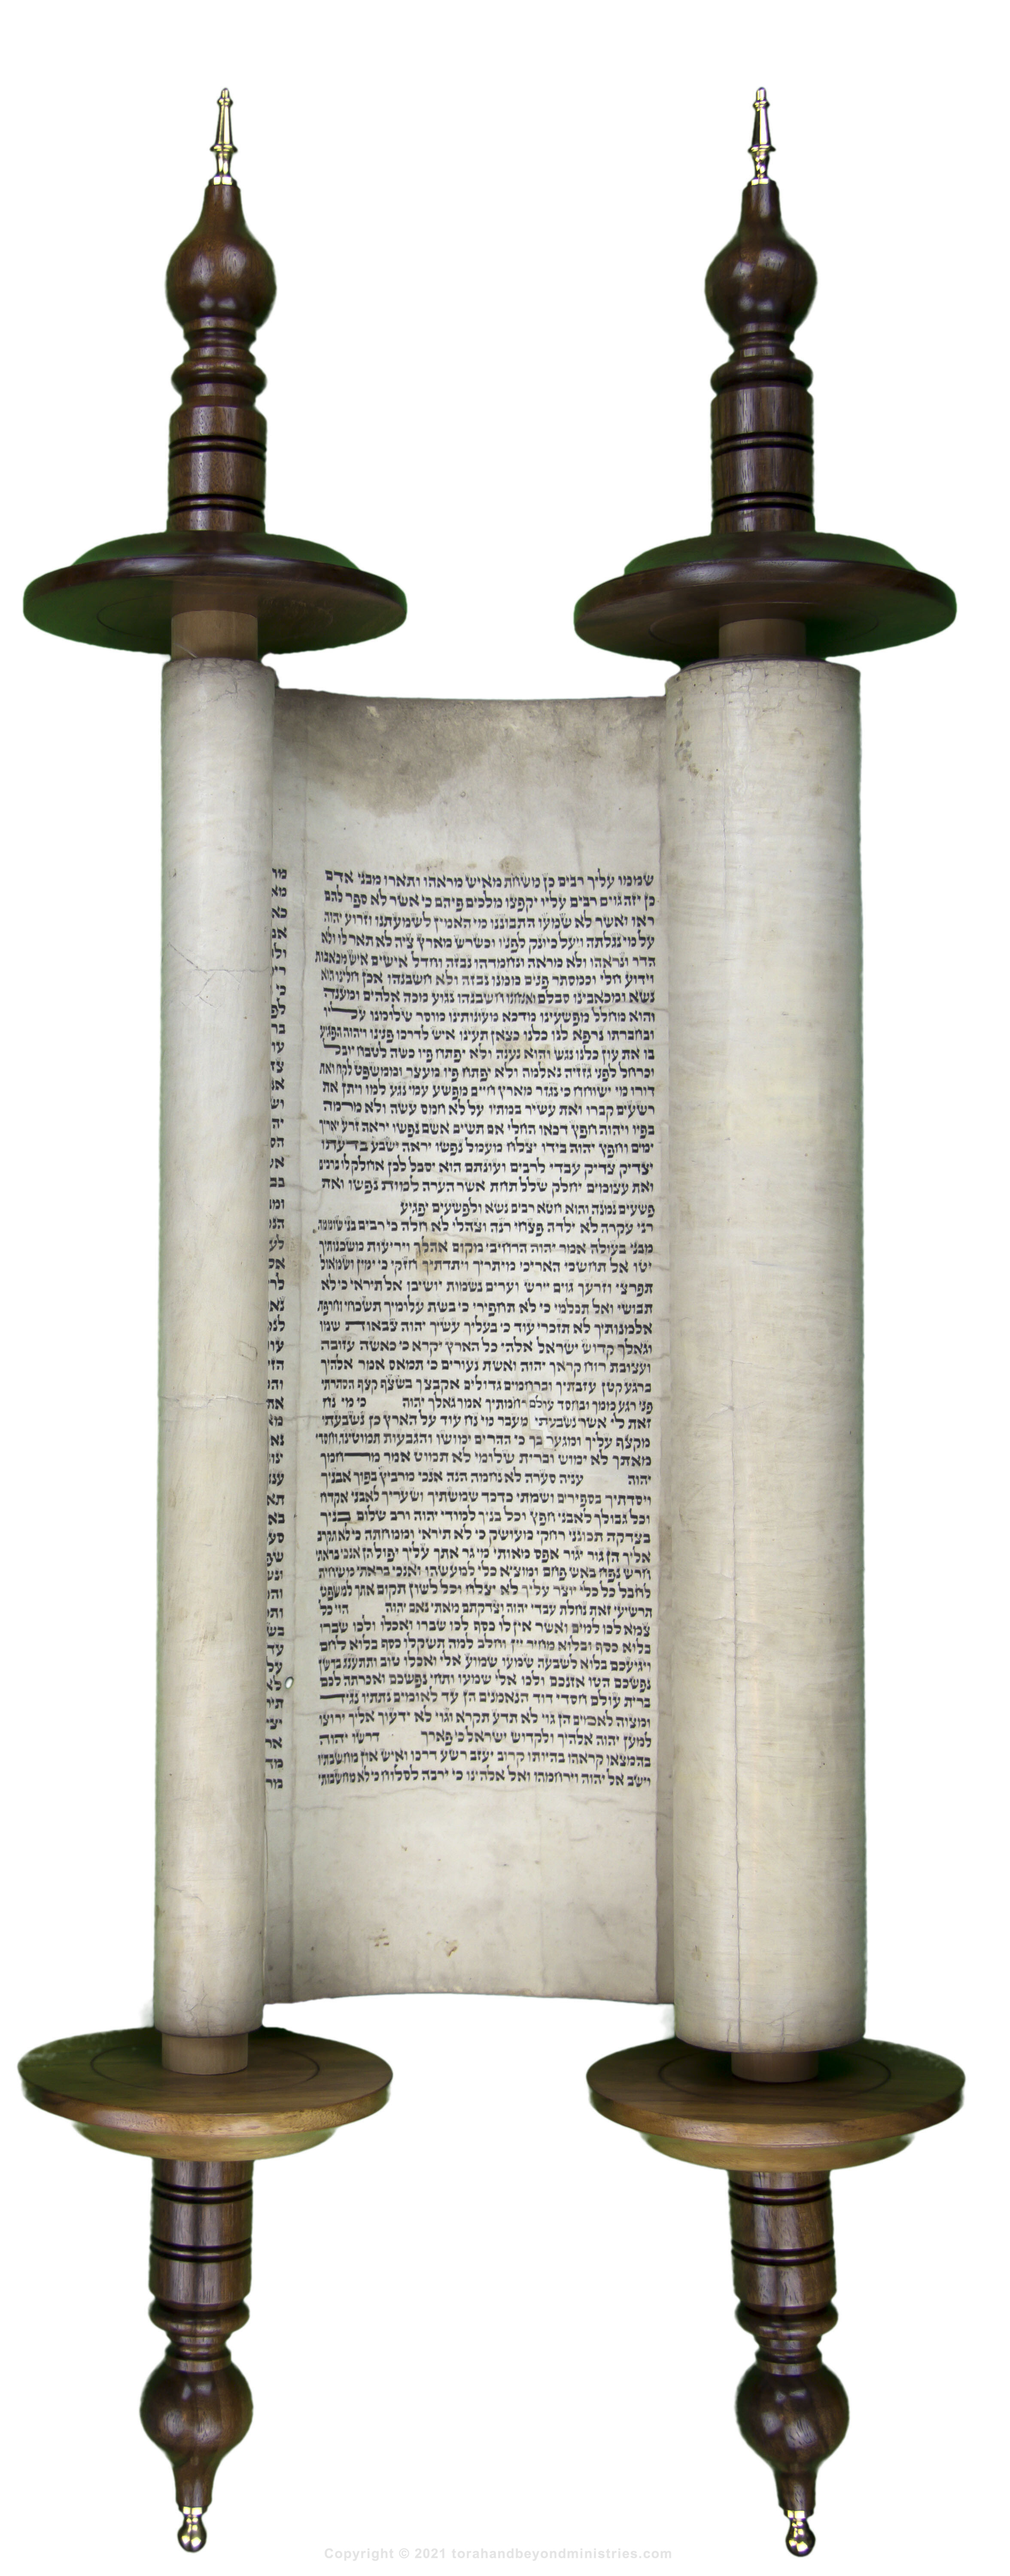 Hebrew Scroll of Isaiah written in Russia opened to Isaiah chapter 53